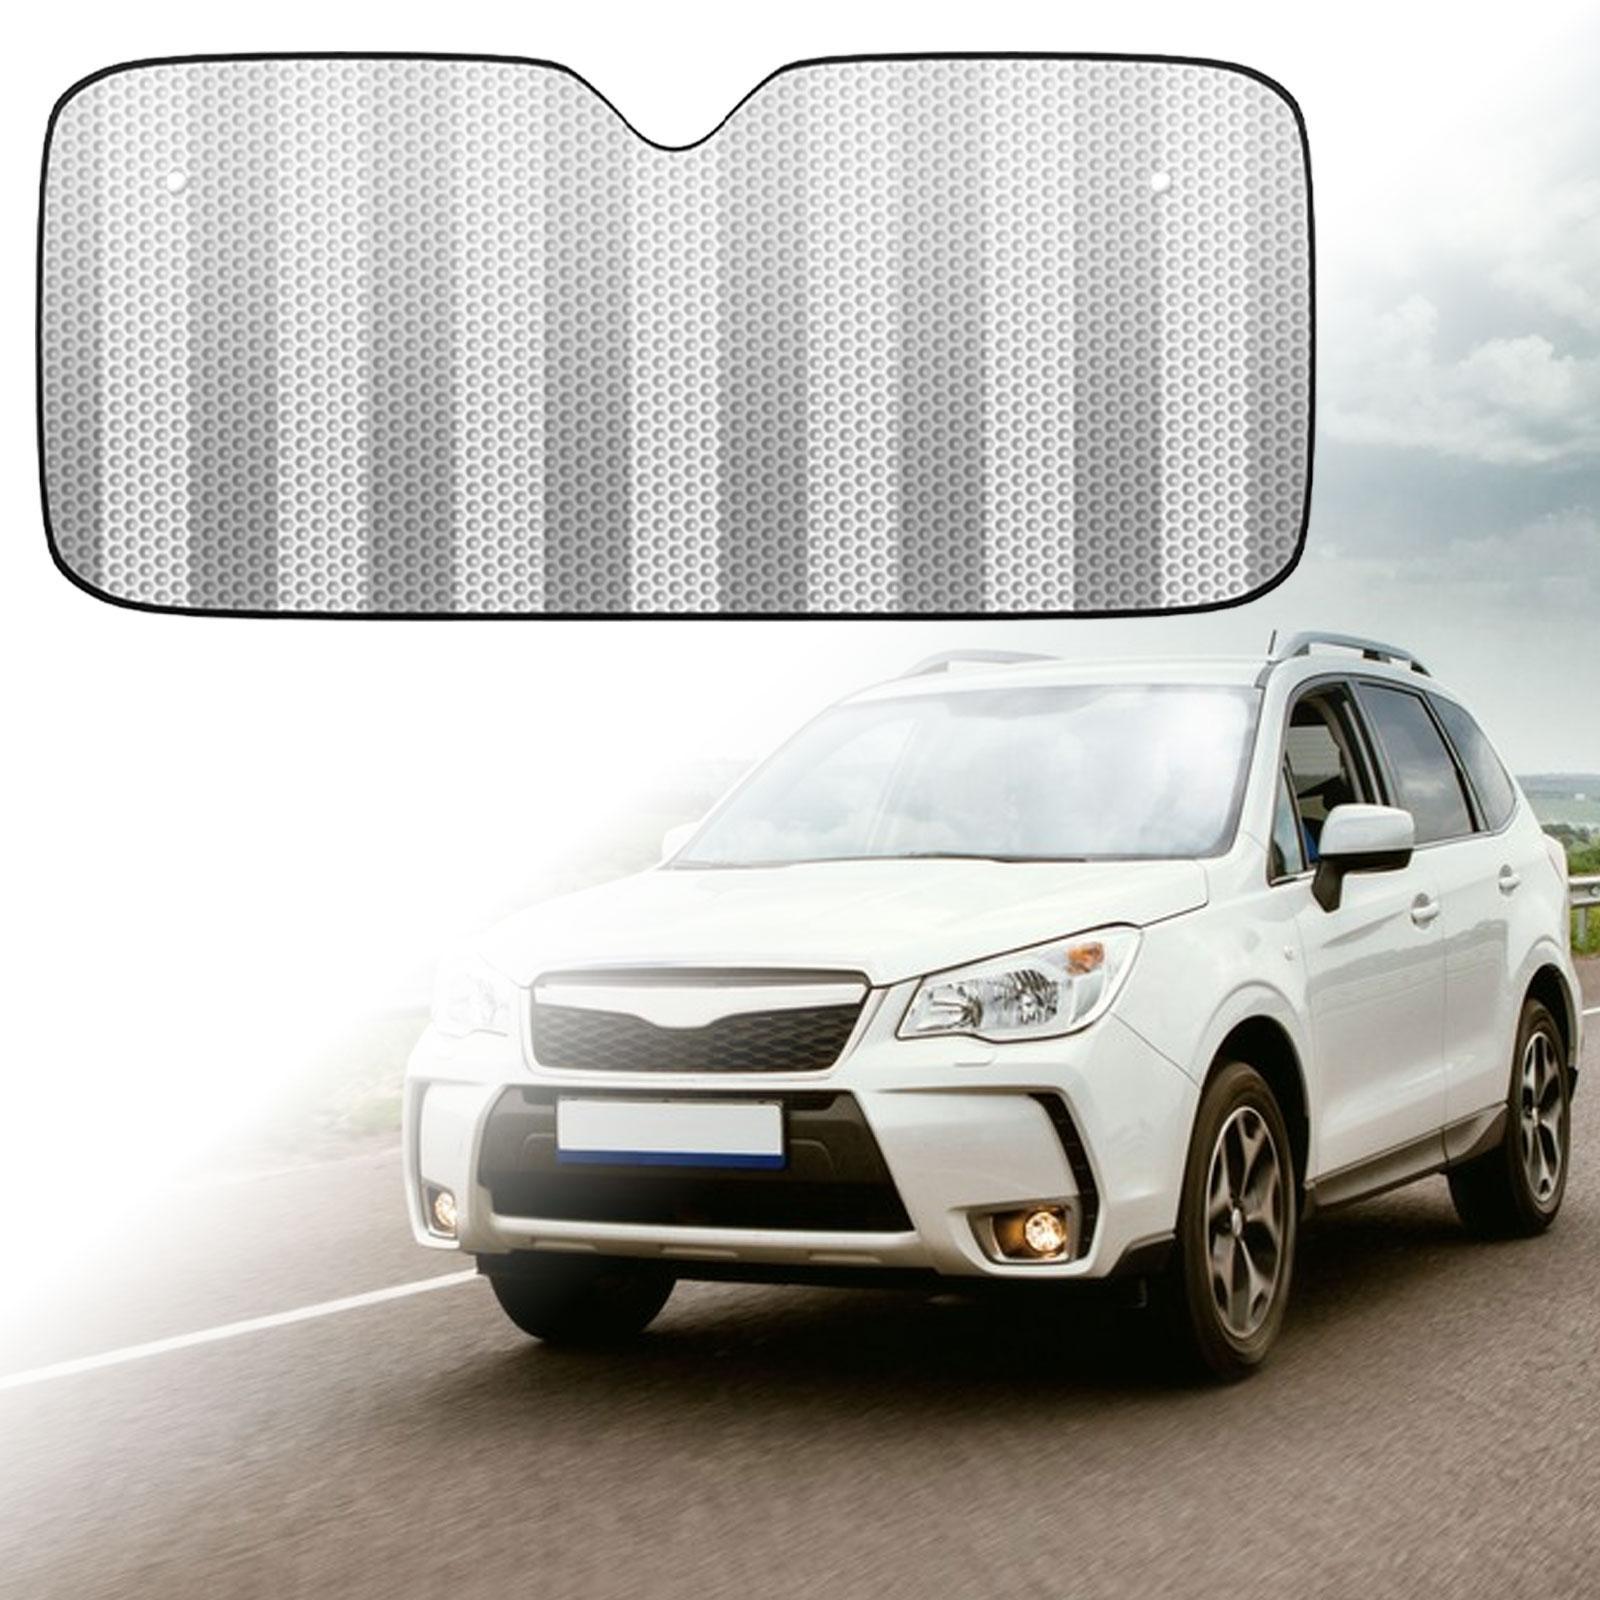 Front Window Car Sun Shades Windshield Sunshade Keeps Vehicle Cool Portable Cling Sunshade for Car Windows for Business Car Compact Car